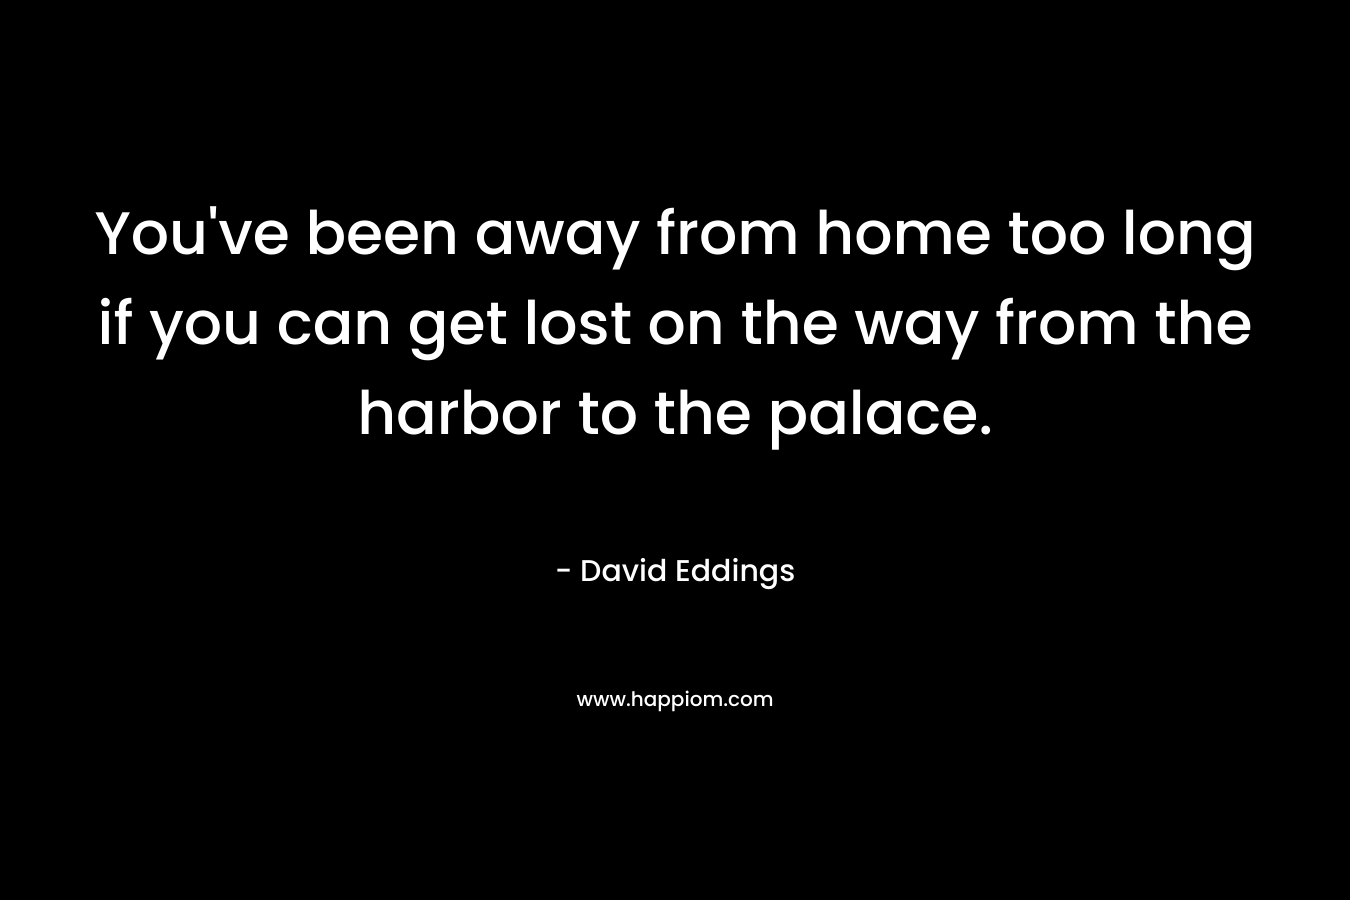 You’ve been away from home too long if you can get lost on the way from the harbor to the palace. – David Eddings